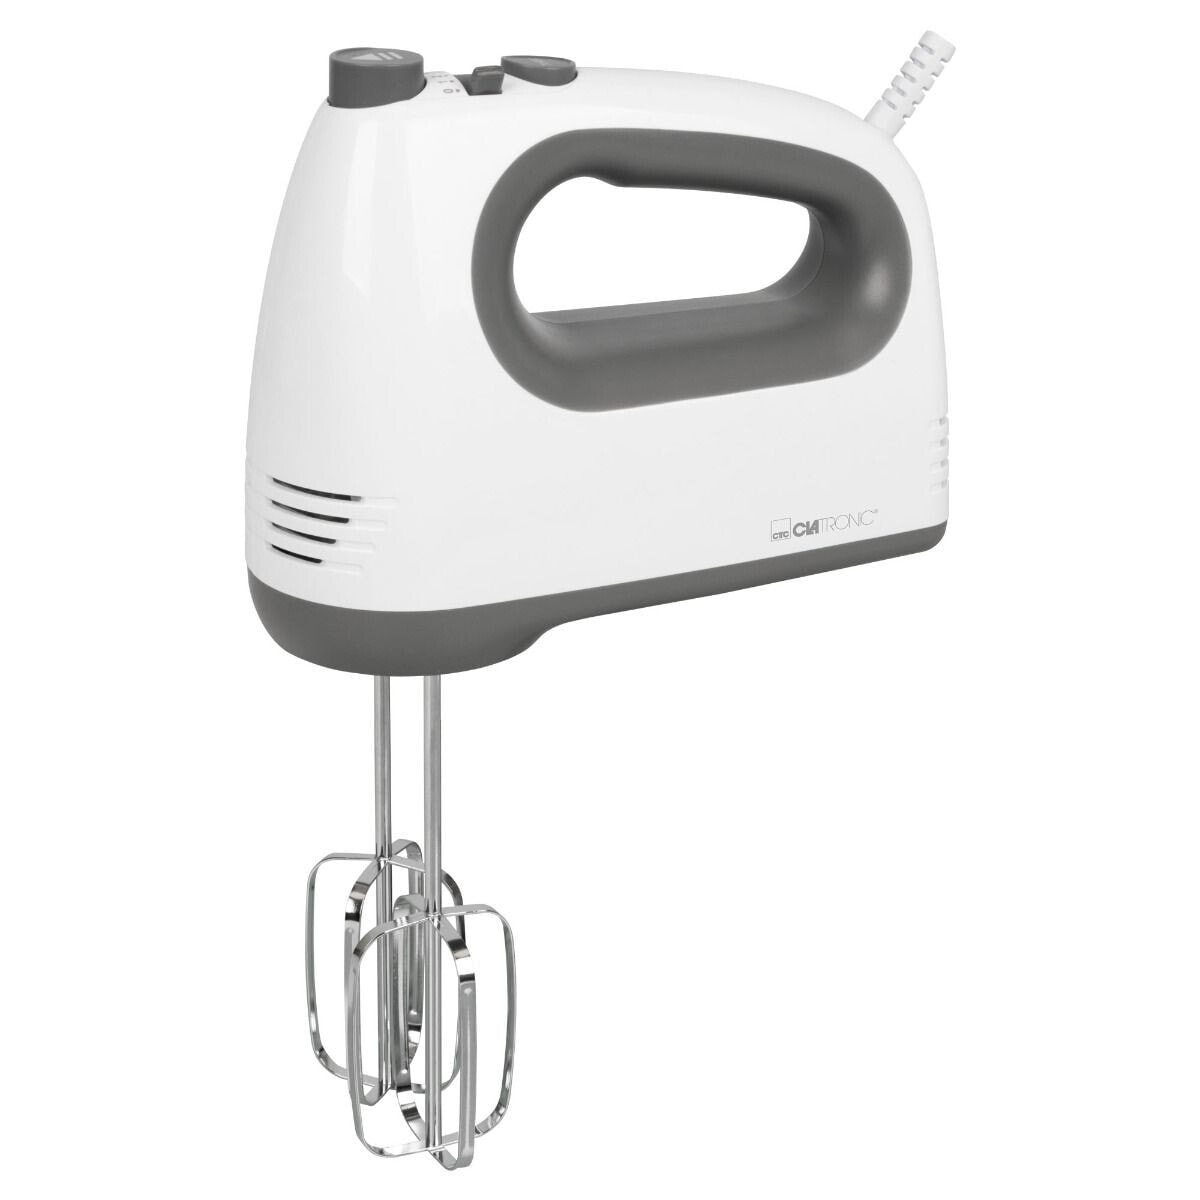 HM 3775 - Hand mixer - Grey - White - Mixing - Buttons - 400 W - 220 - 240 V